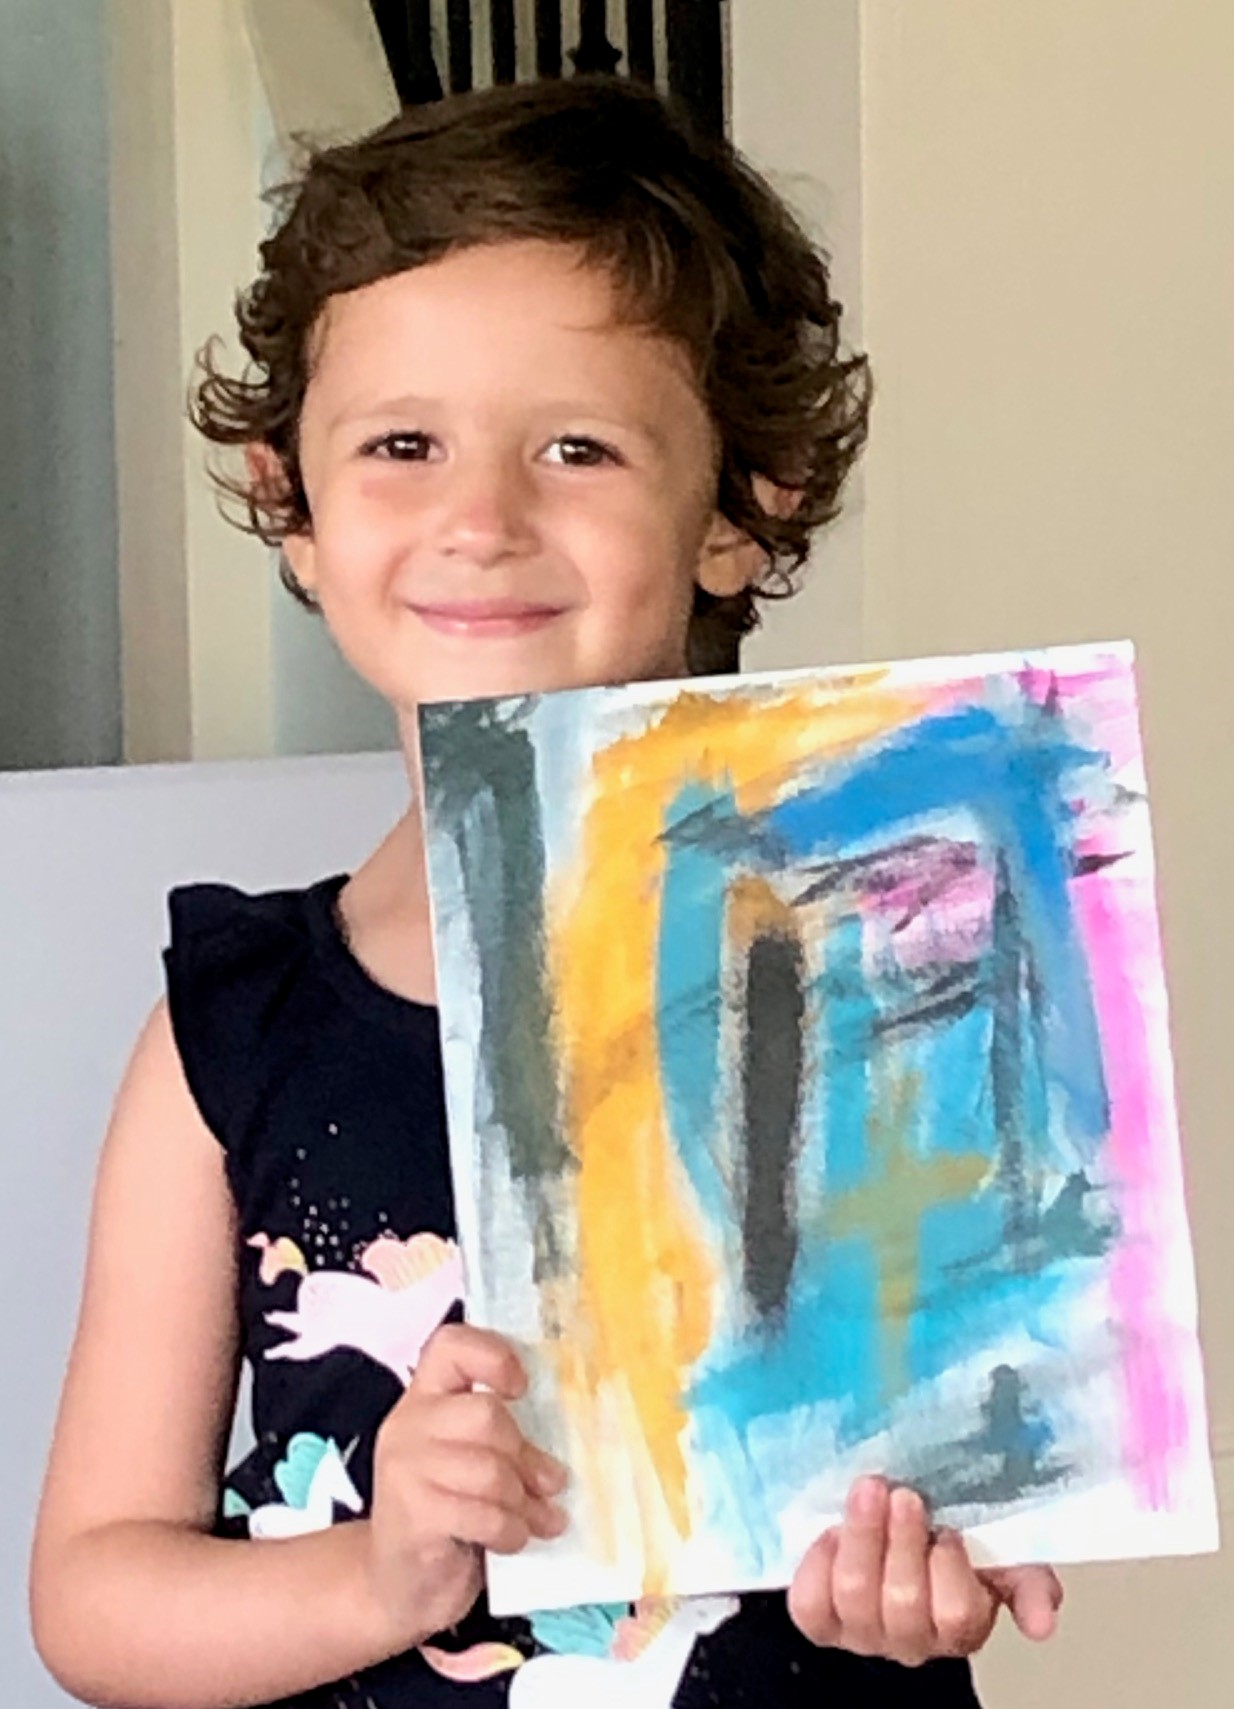 Josie Macchio poses with a painting